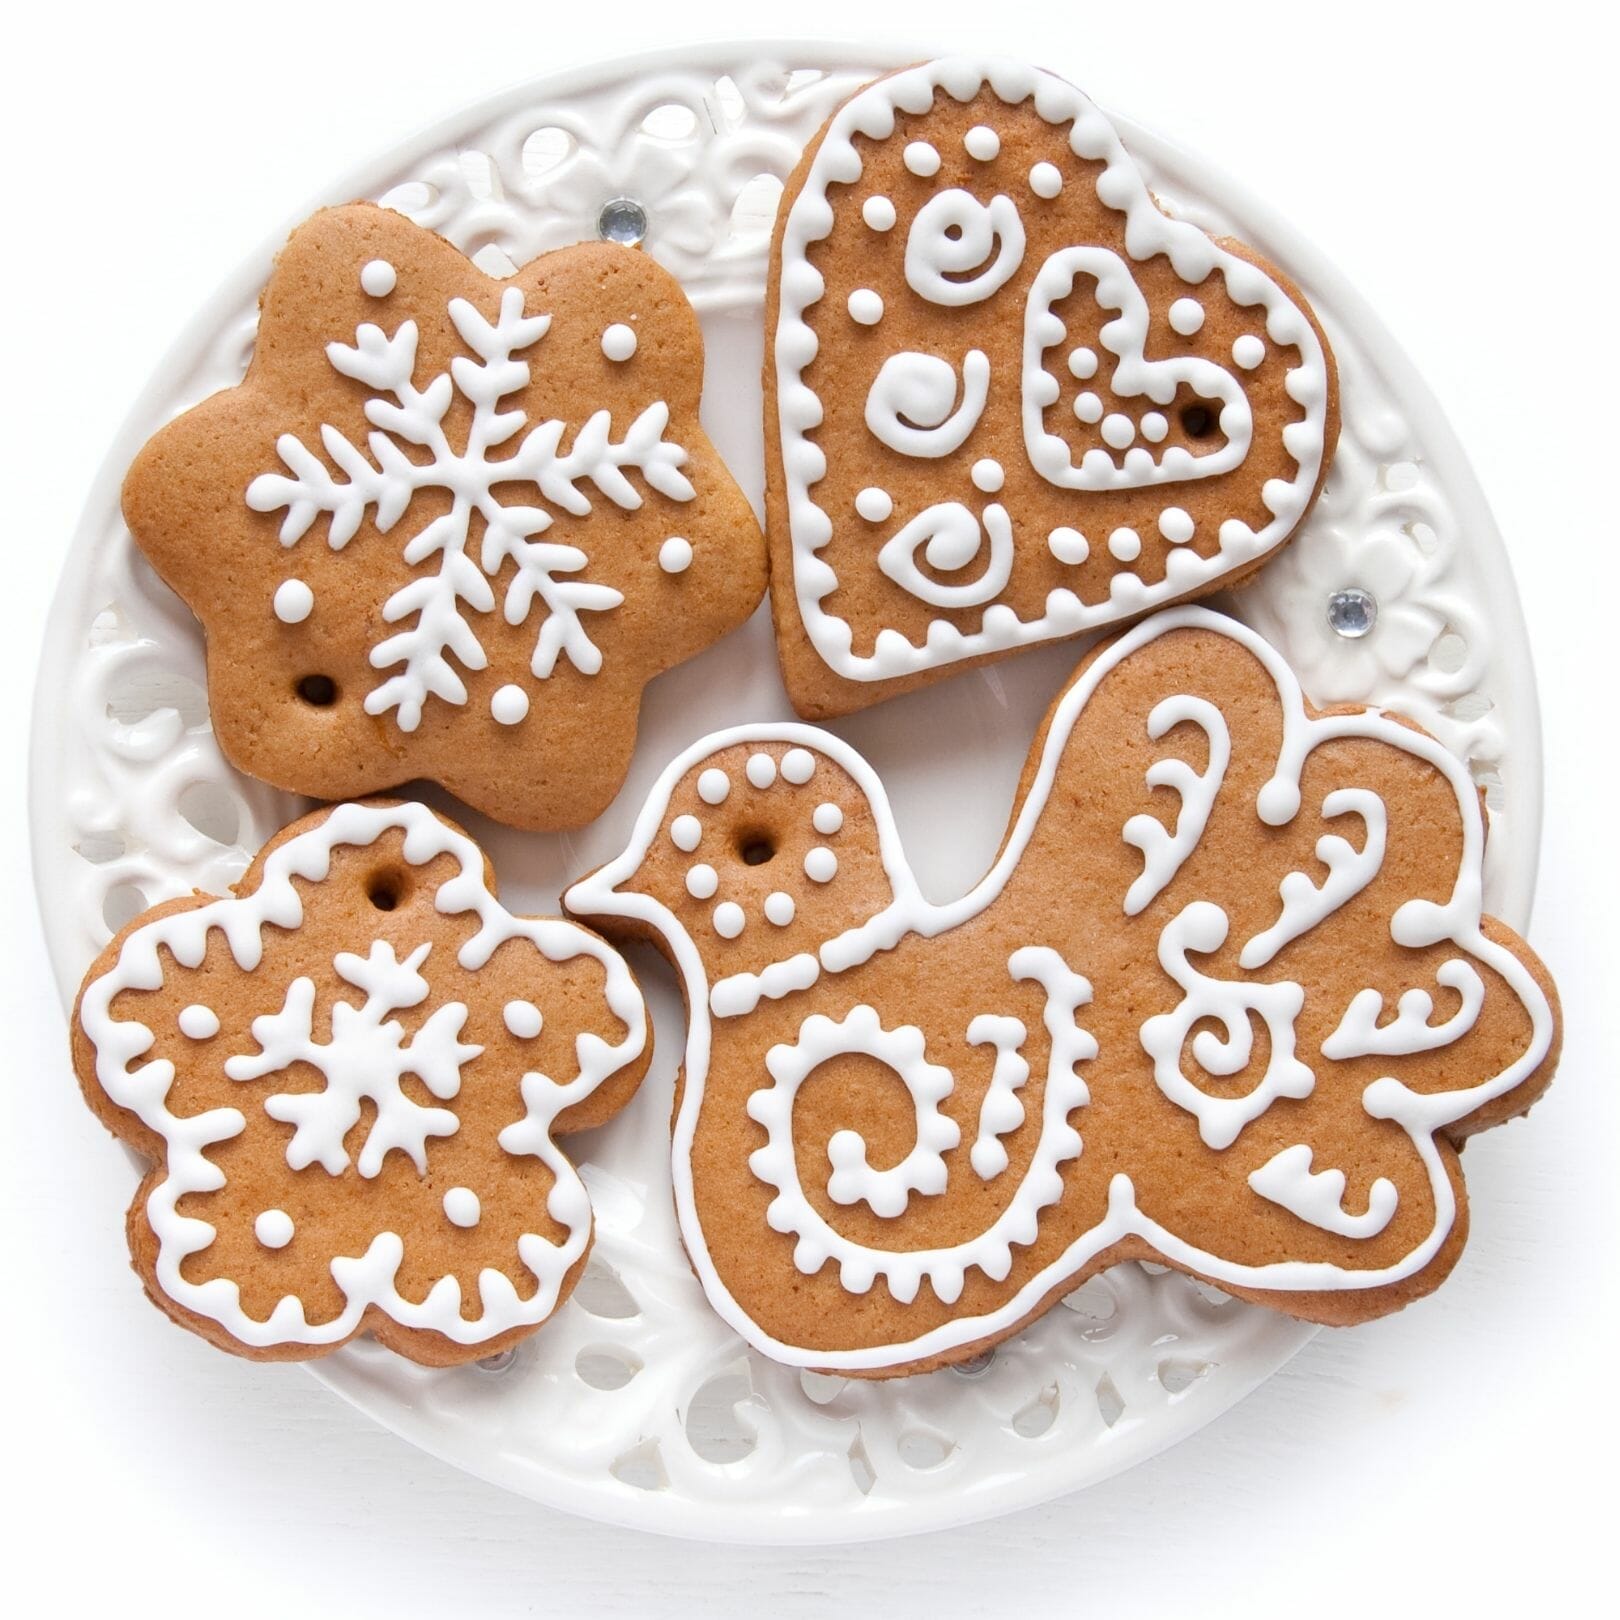 White icing and pretty festive designs on gingerbread cookies. Arranged on a round white plate.